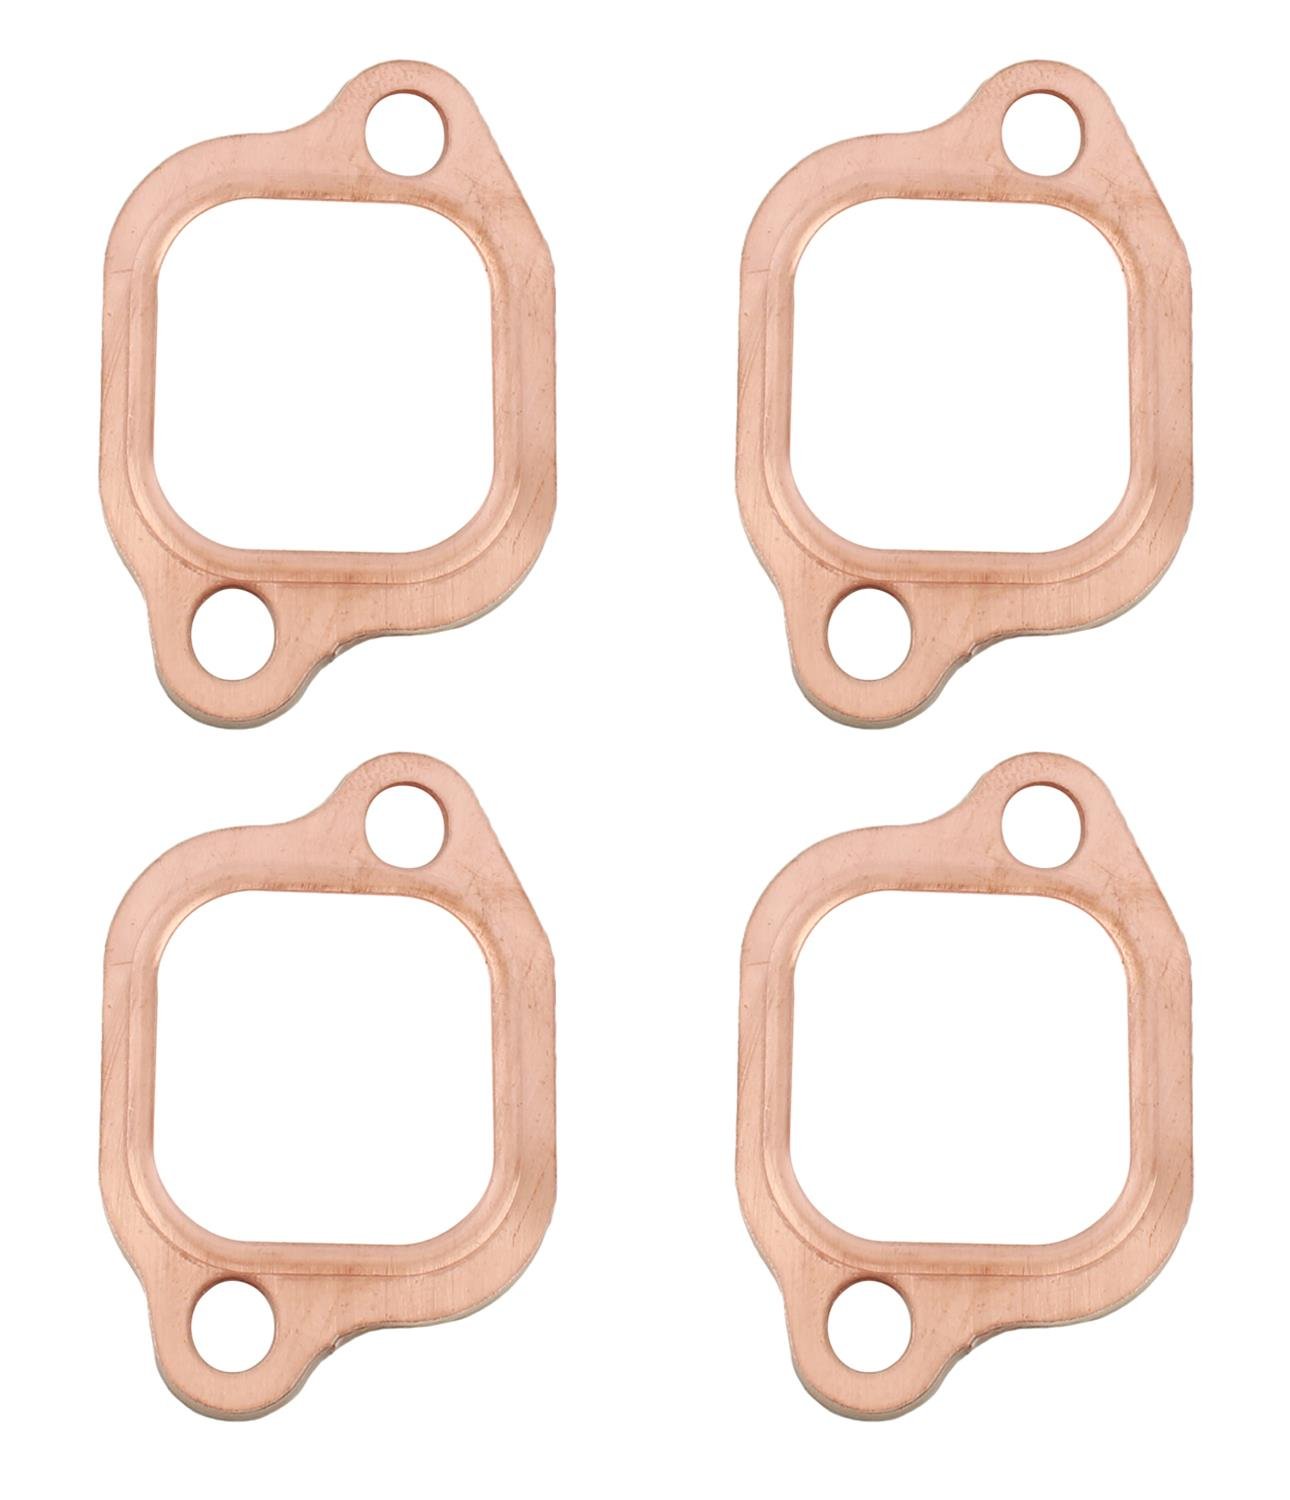 Pro Copper Exhaust Gaskets for Ford 2.3L Engine with Esslinger Heads